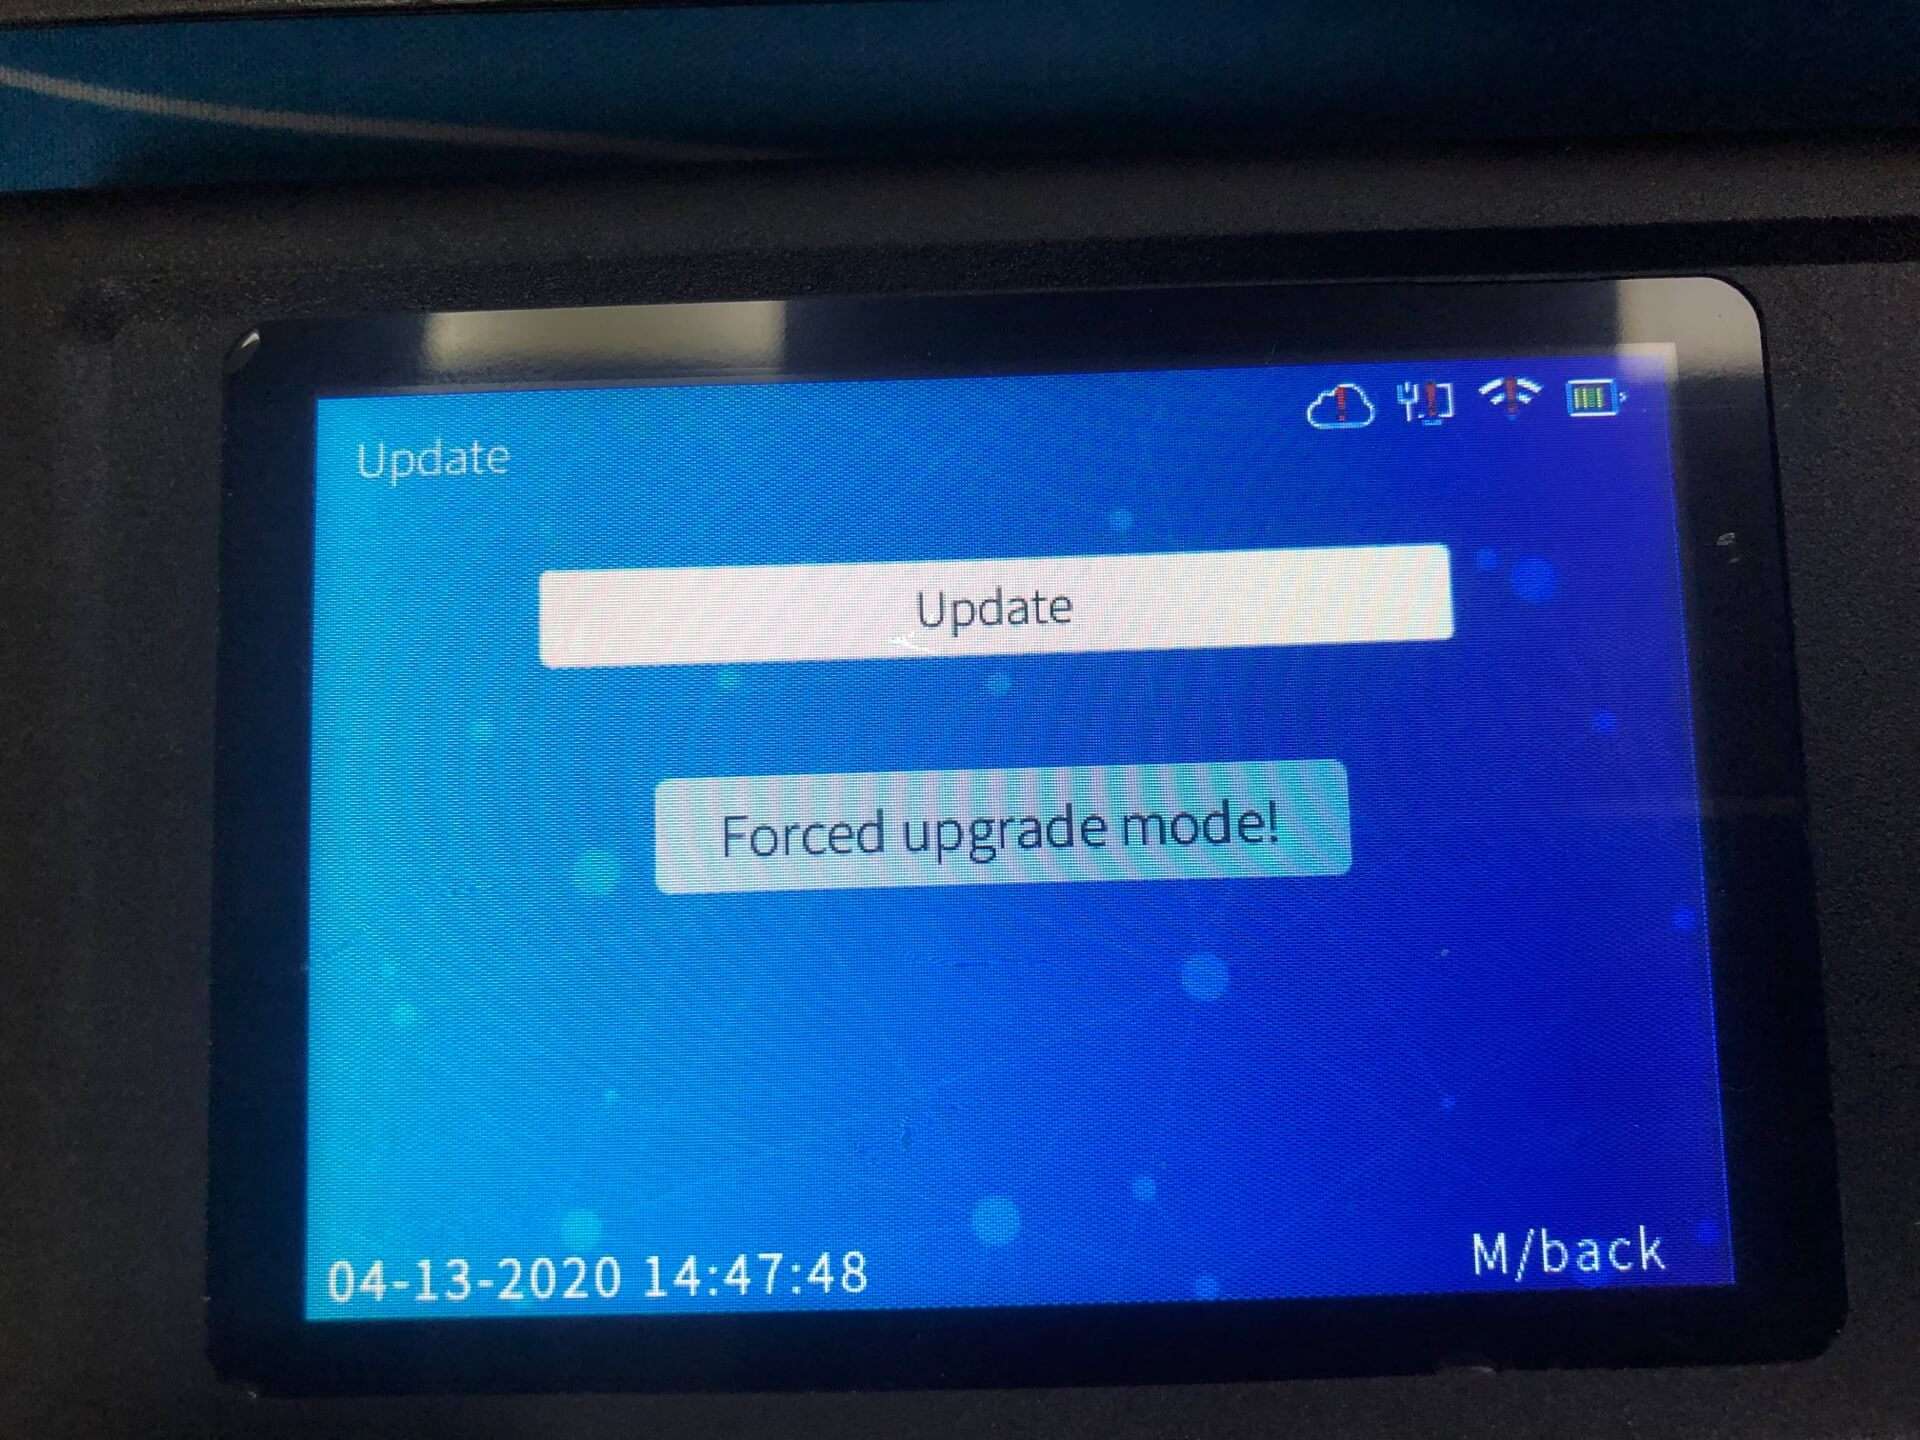 the device will change to forced upgrade mode